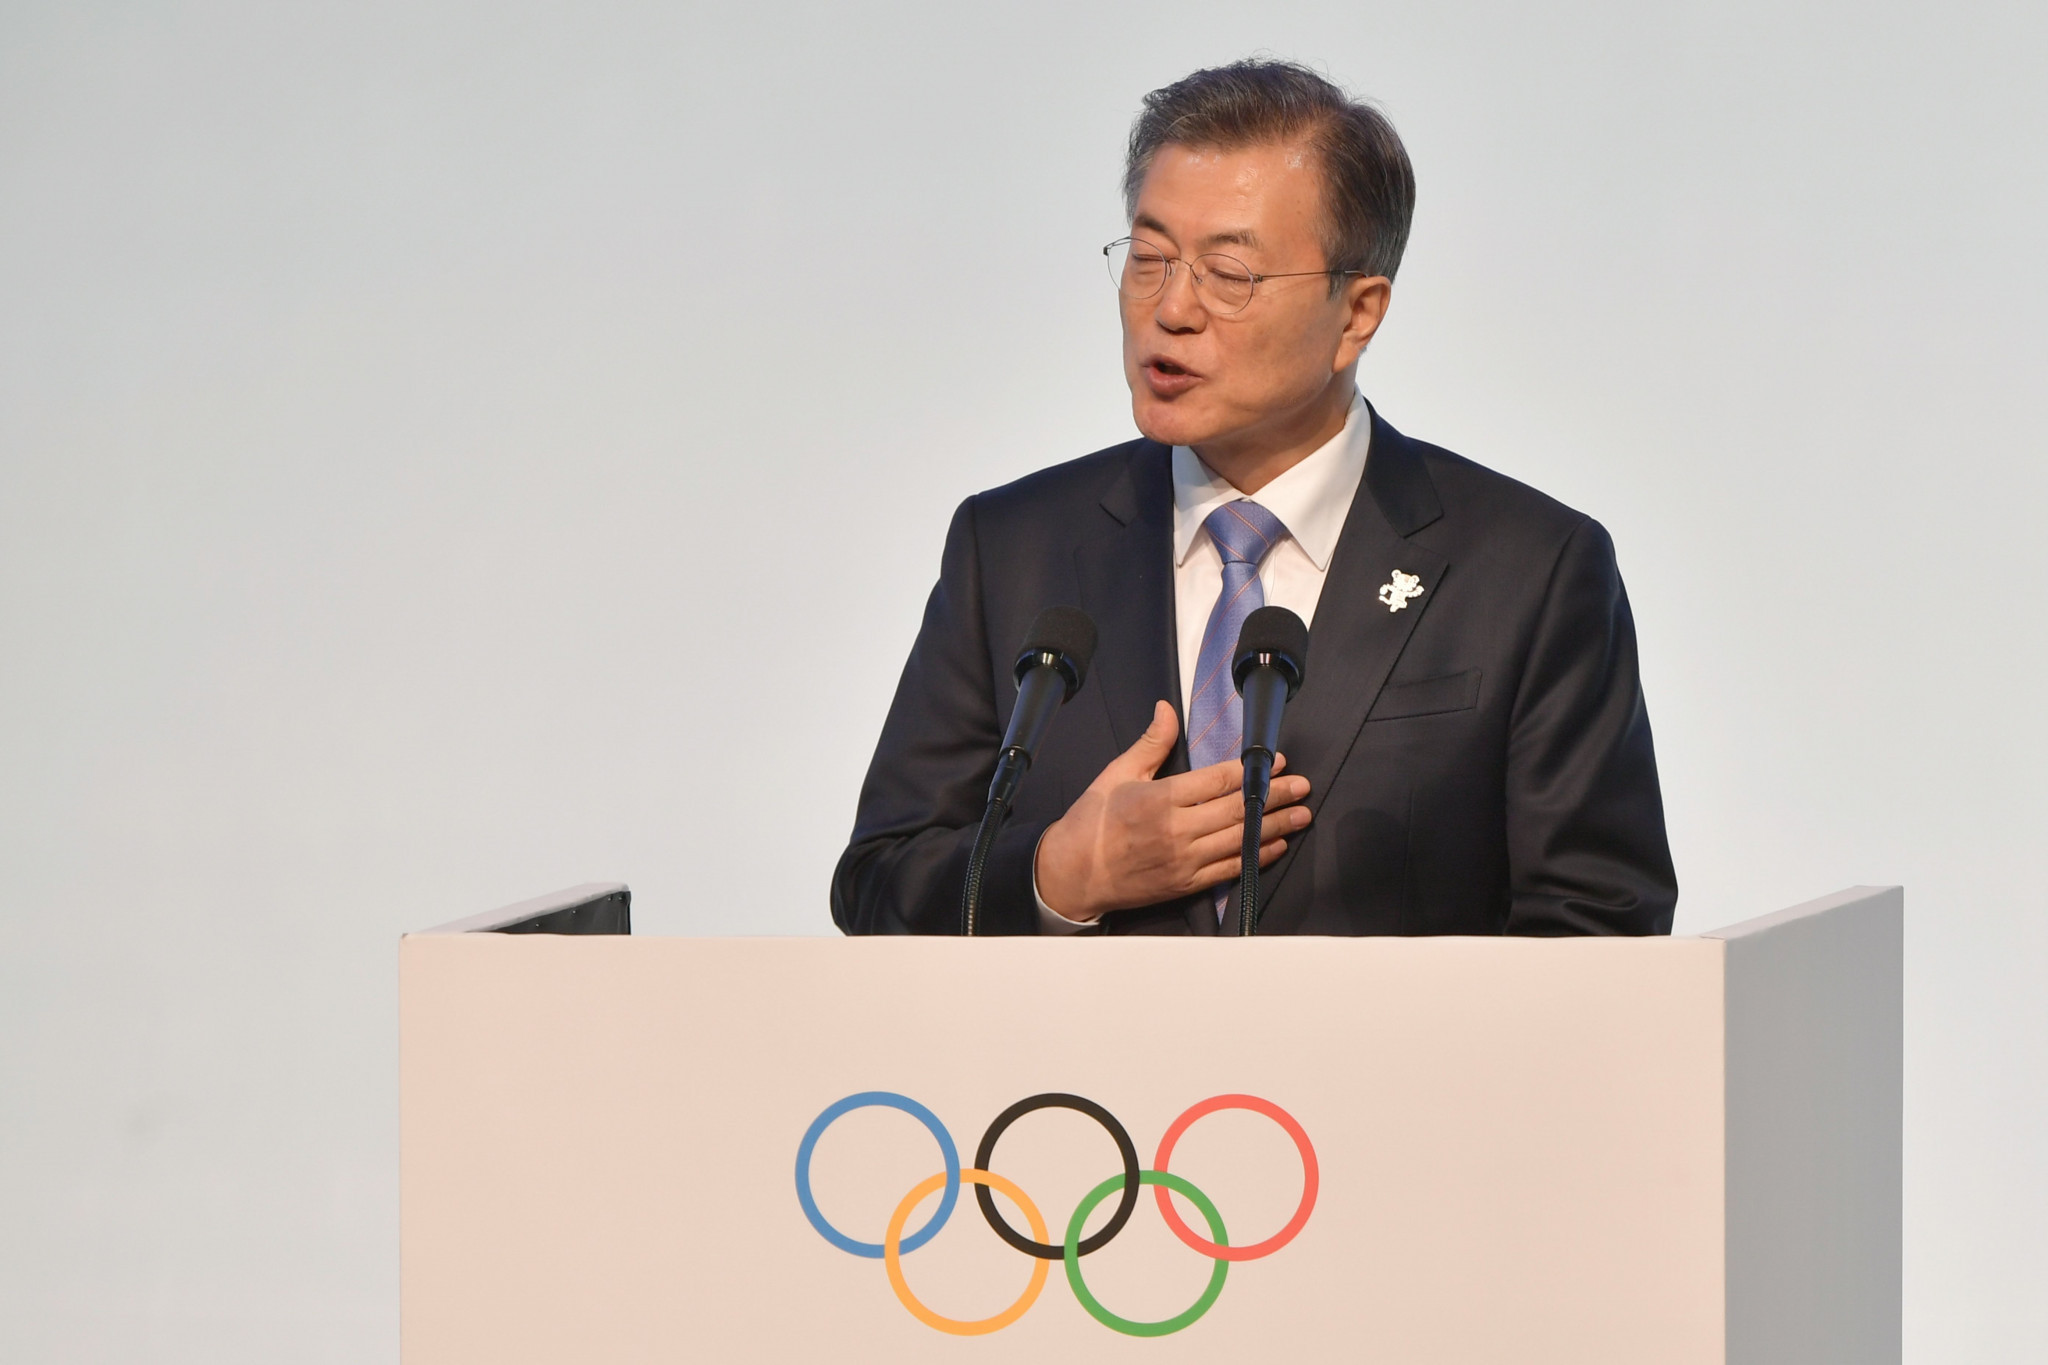 South Korean President Moon Jae-in spoke at the Opening Ceremony of the IOC Session ©Getty Images